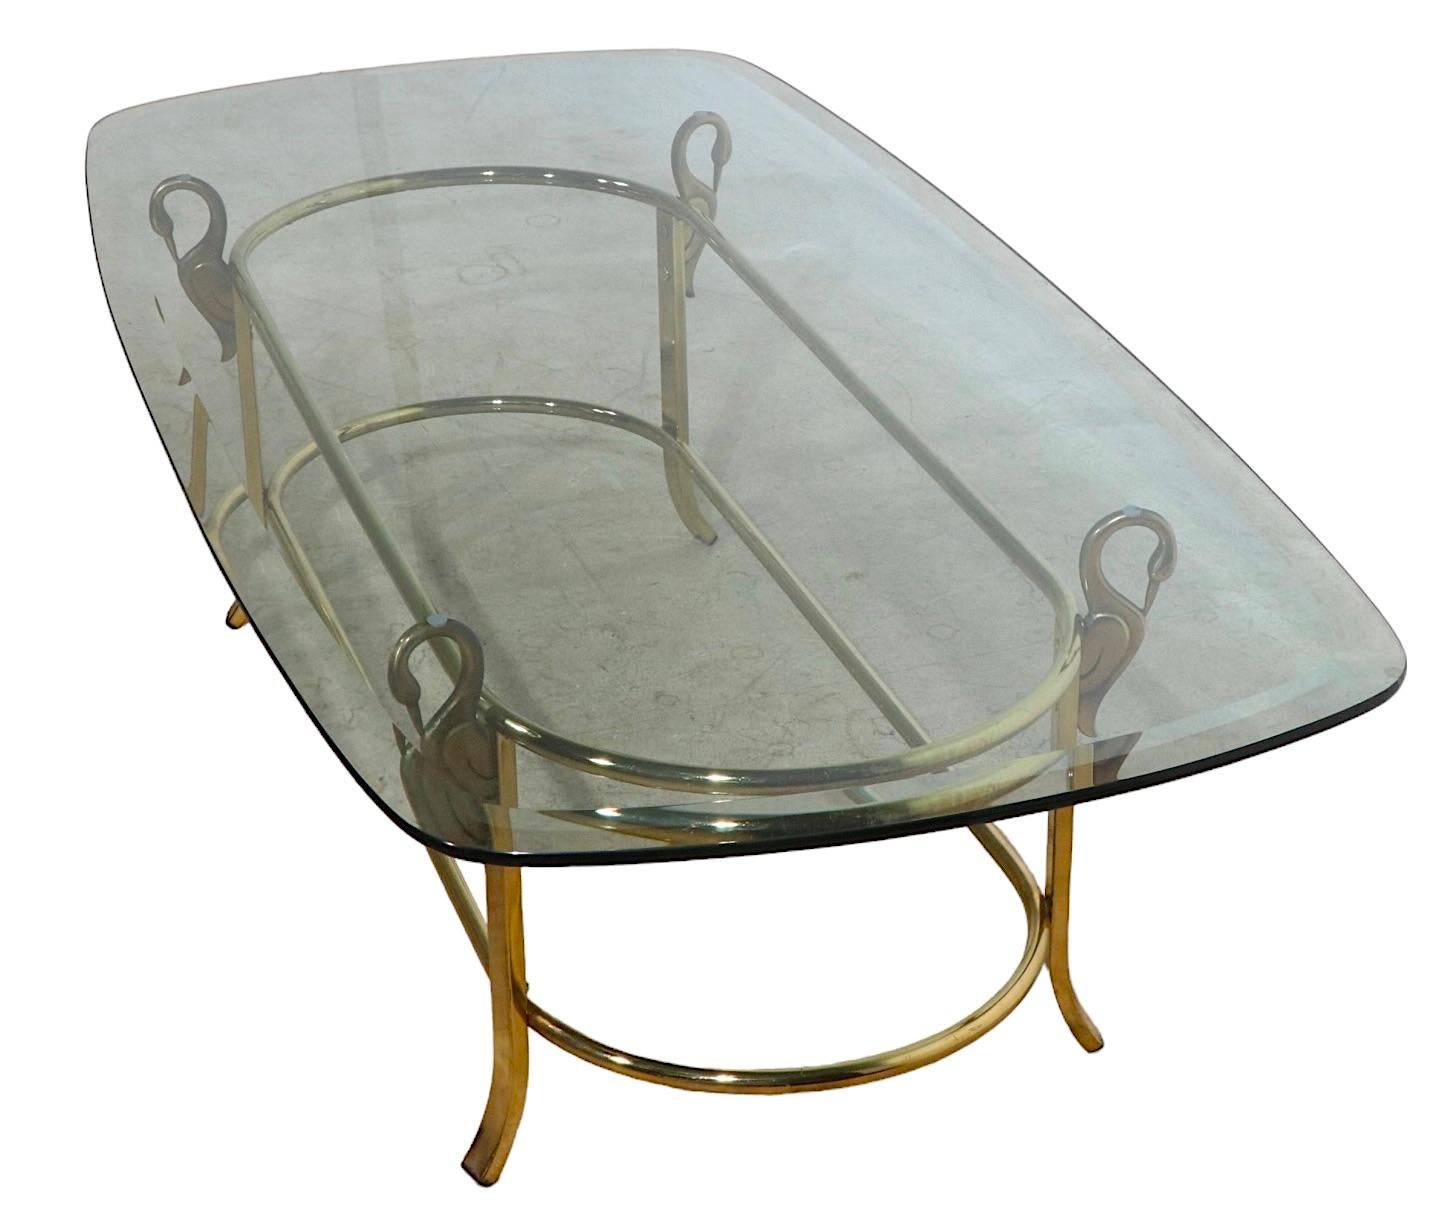 Oval Beveled Glass Top Coffee Table with Brass Swan Base Att. to La Barge 8